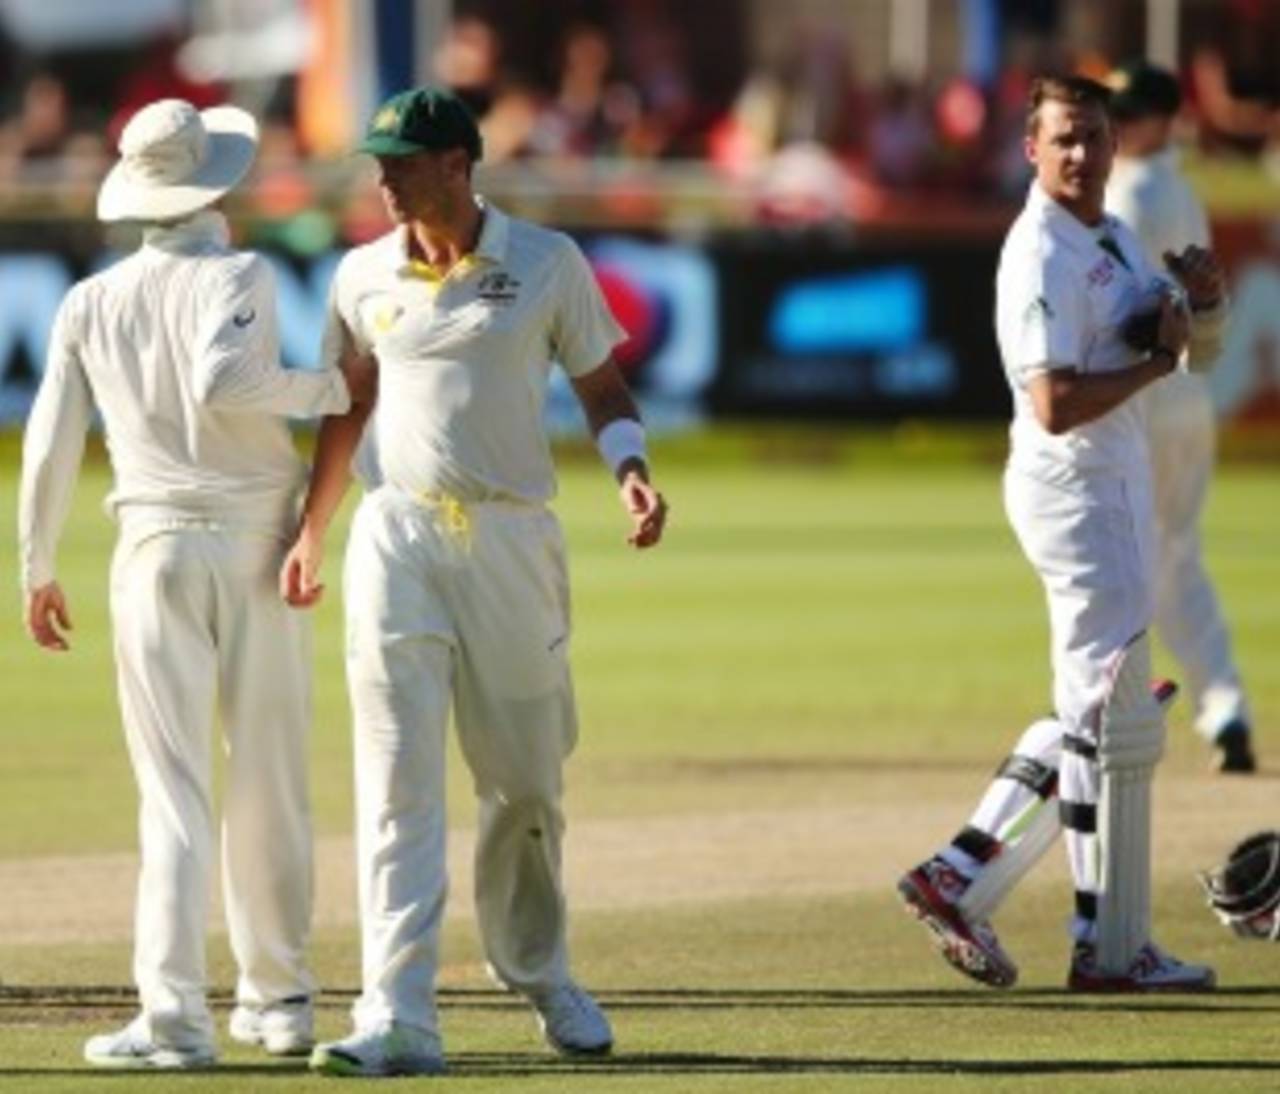 Michael Clarke had got involved in an exchange between James Pattinson and Dale Steyn during the Newlands Test earlier this year&nbsp;&nbsp;&bull;&nbsp;&nbsp;Getty Images